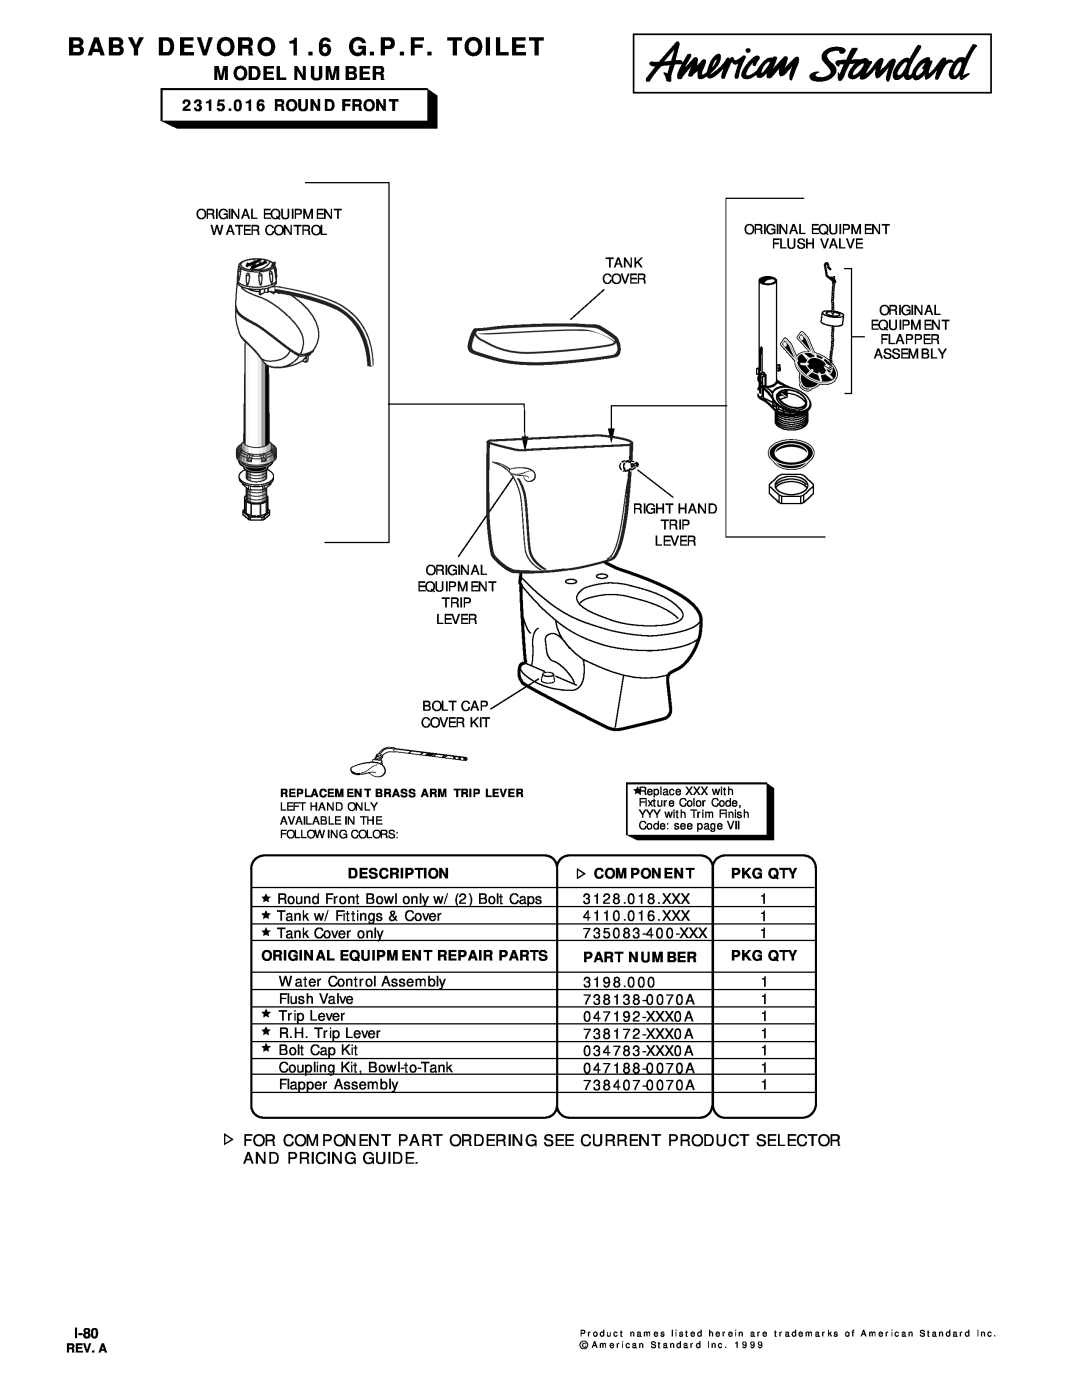 American Standard 2315.016 Round Front manual BABY DEVORO 1.6 G.P.F. TOILET, Model Number, And Pricing Guide, Description 